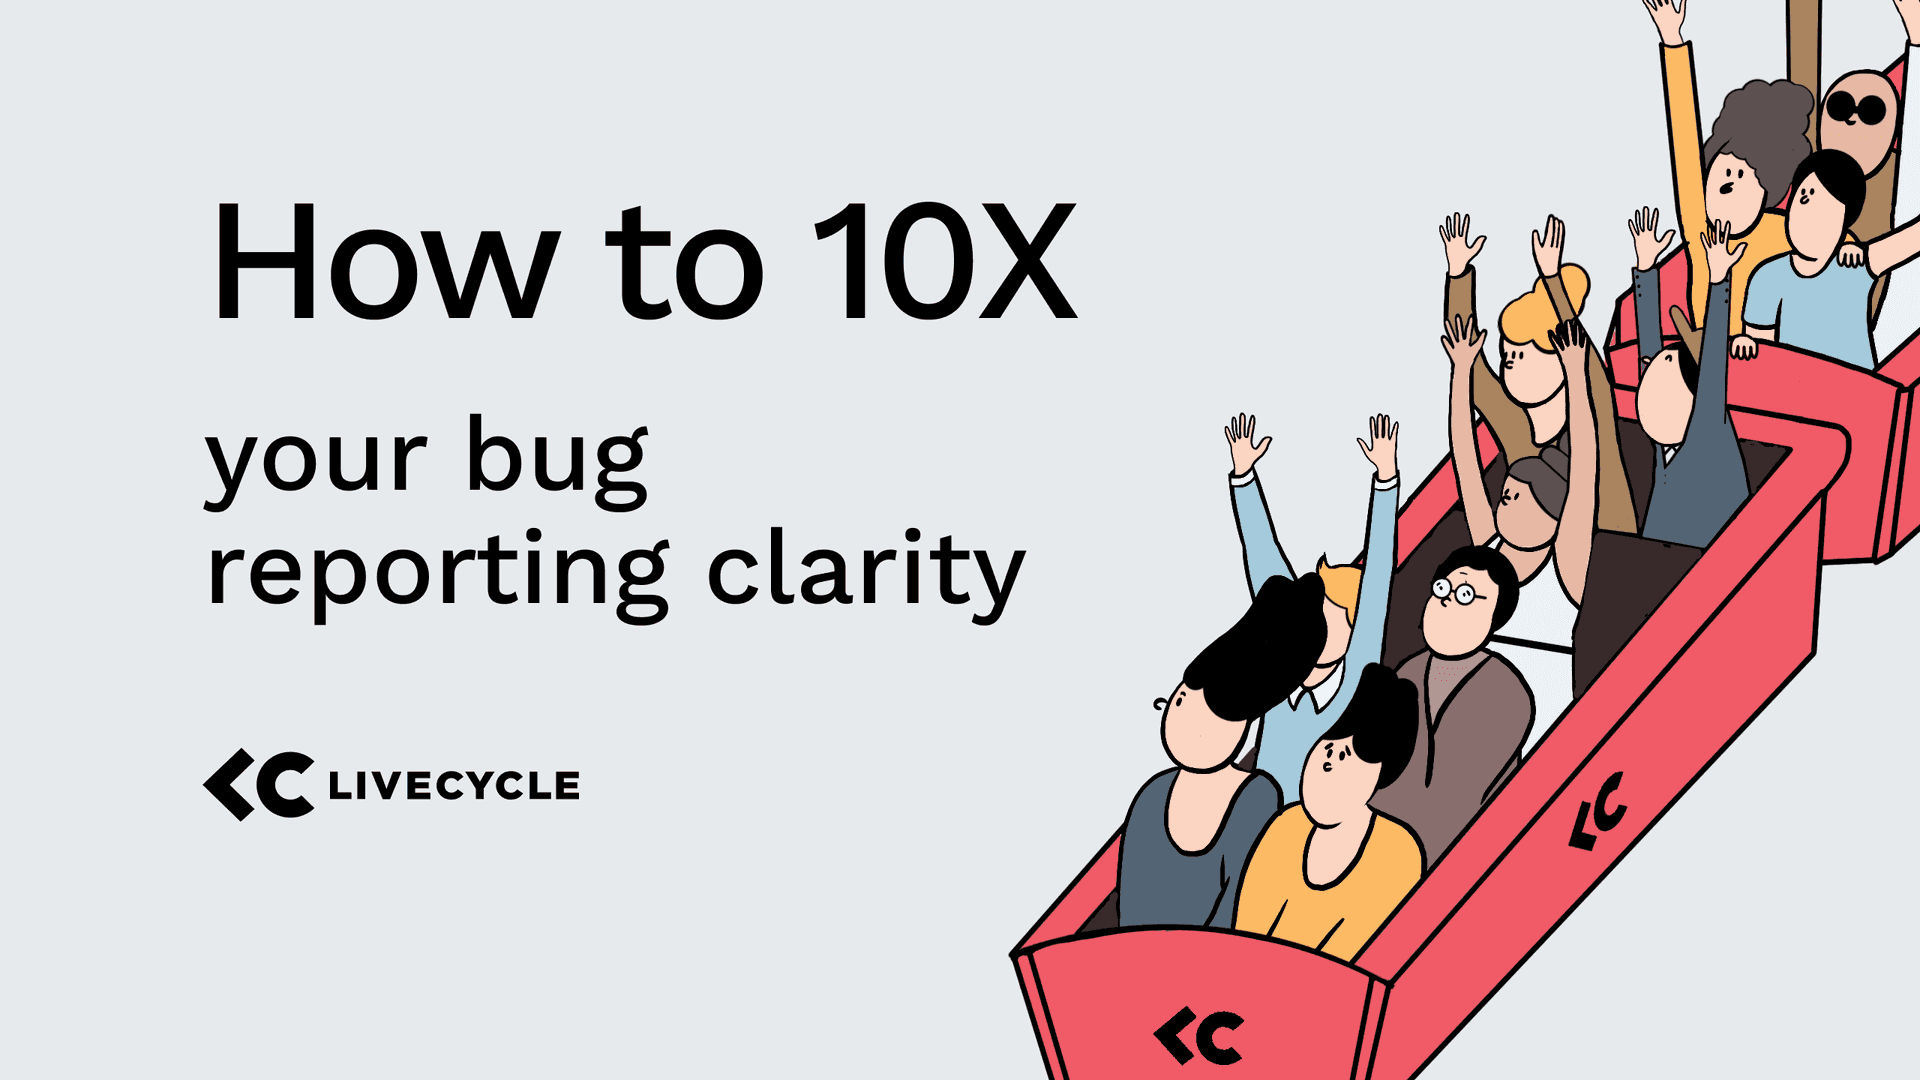 How to 10x Your Bug Reporting Clarity Using Livecycle